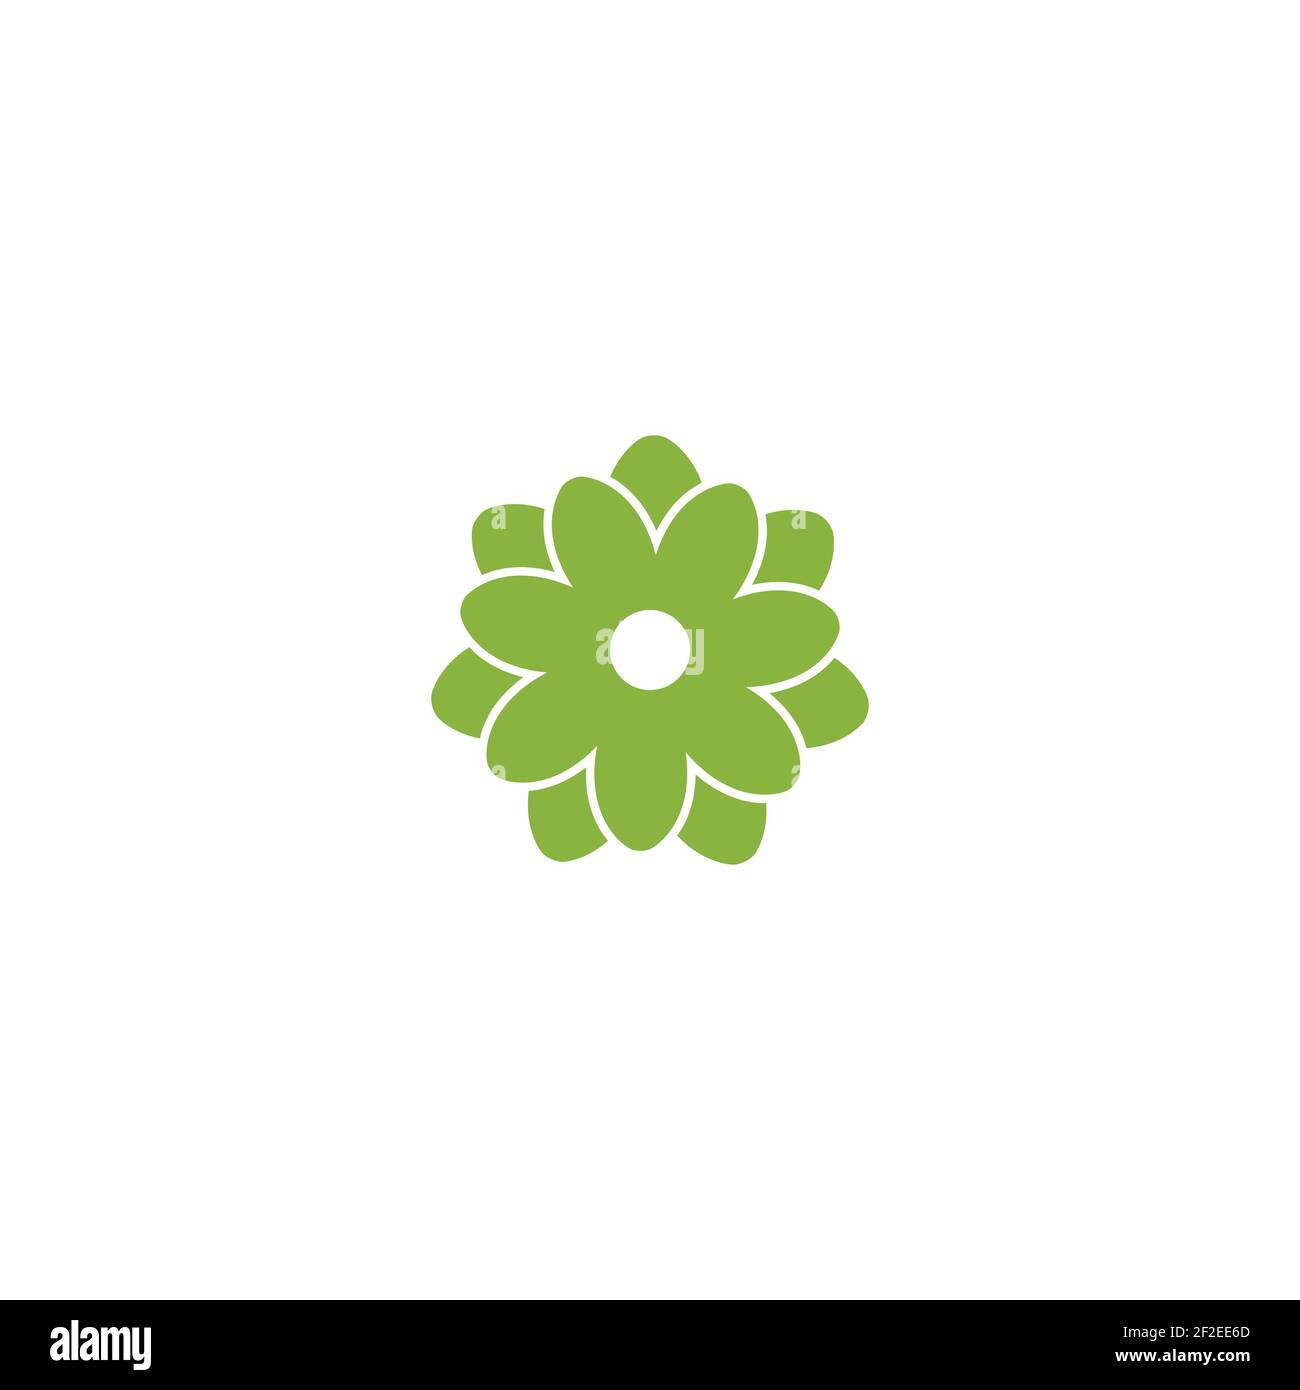 Green flat icon of chrysanthemum flower. Big Bloom with big oval petals and white core. Stock Vector